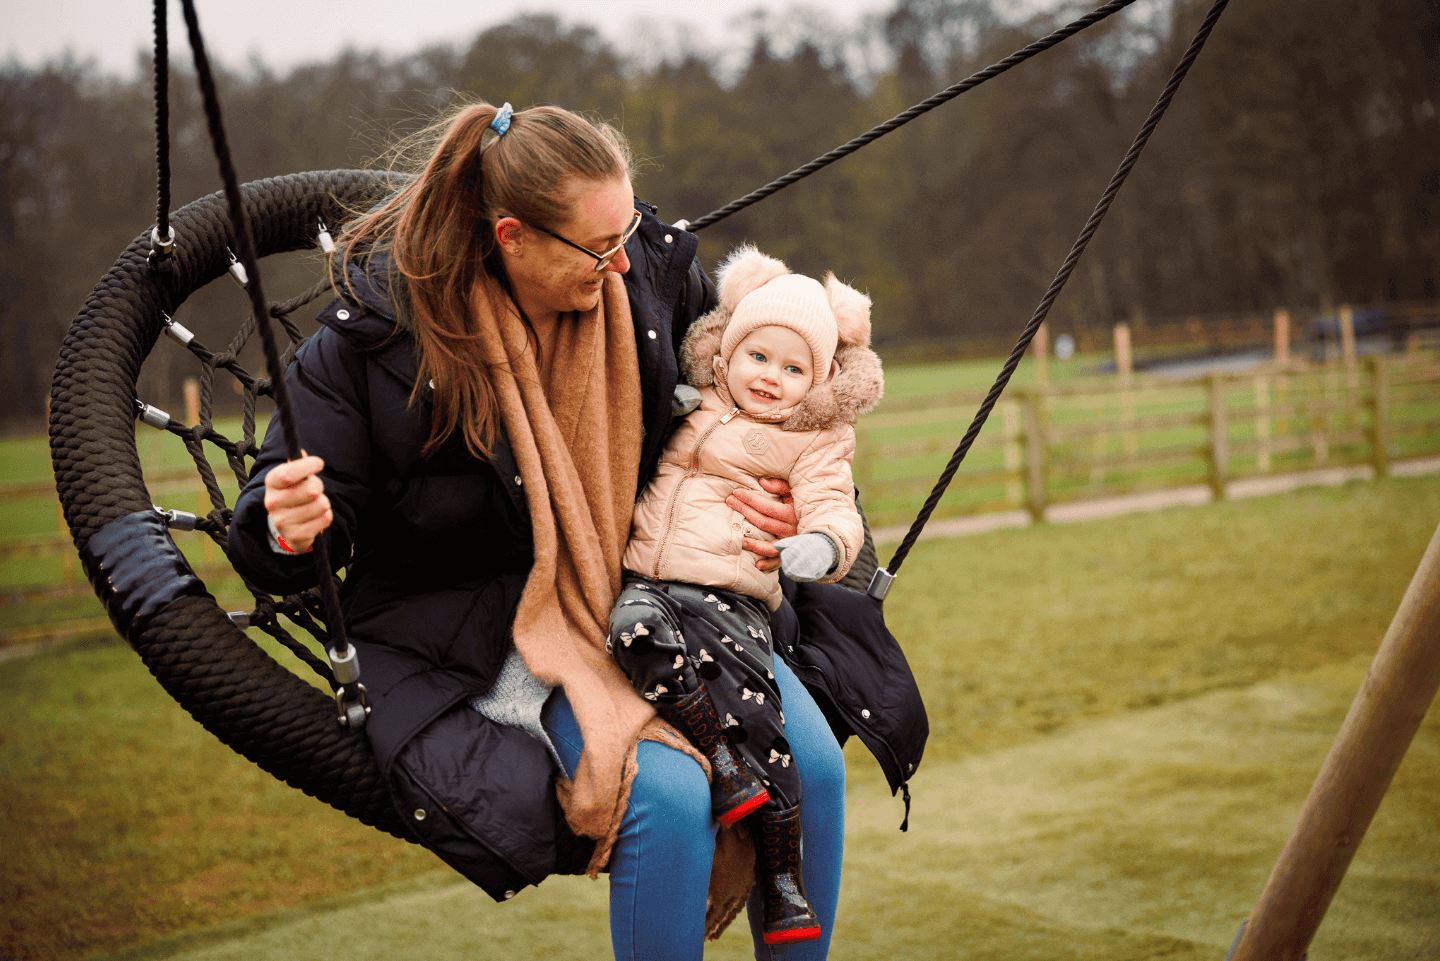 Family playing on swing in Stockeld Park's outdoor playground